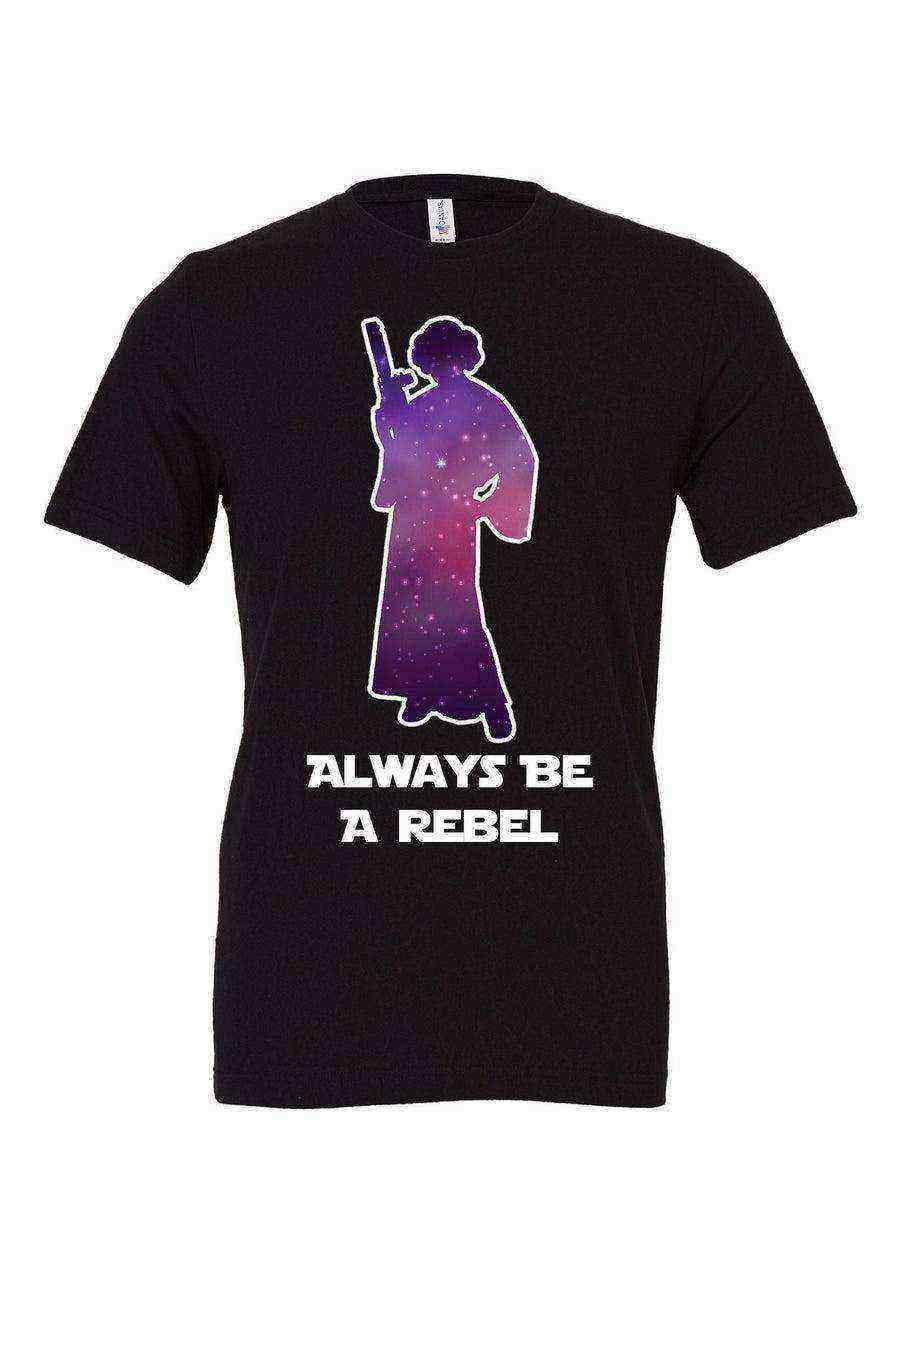 Toddler | Star Wars Princess Leia Galaxy Background Tee | Always Be A Rebel - Dylan's Tees